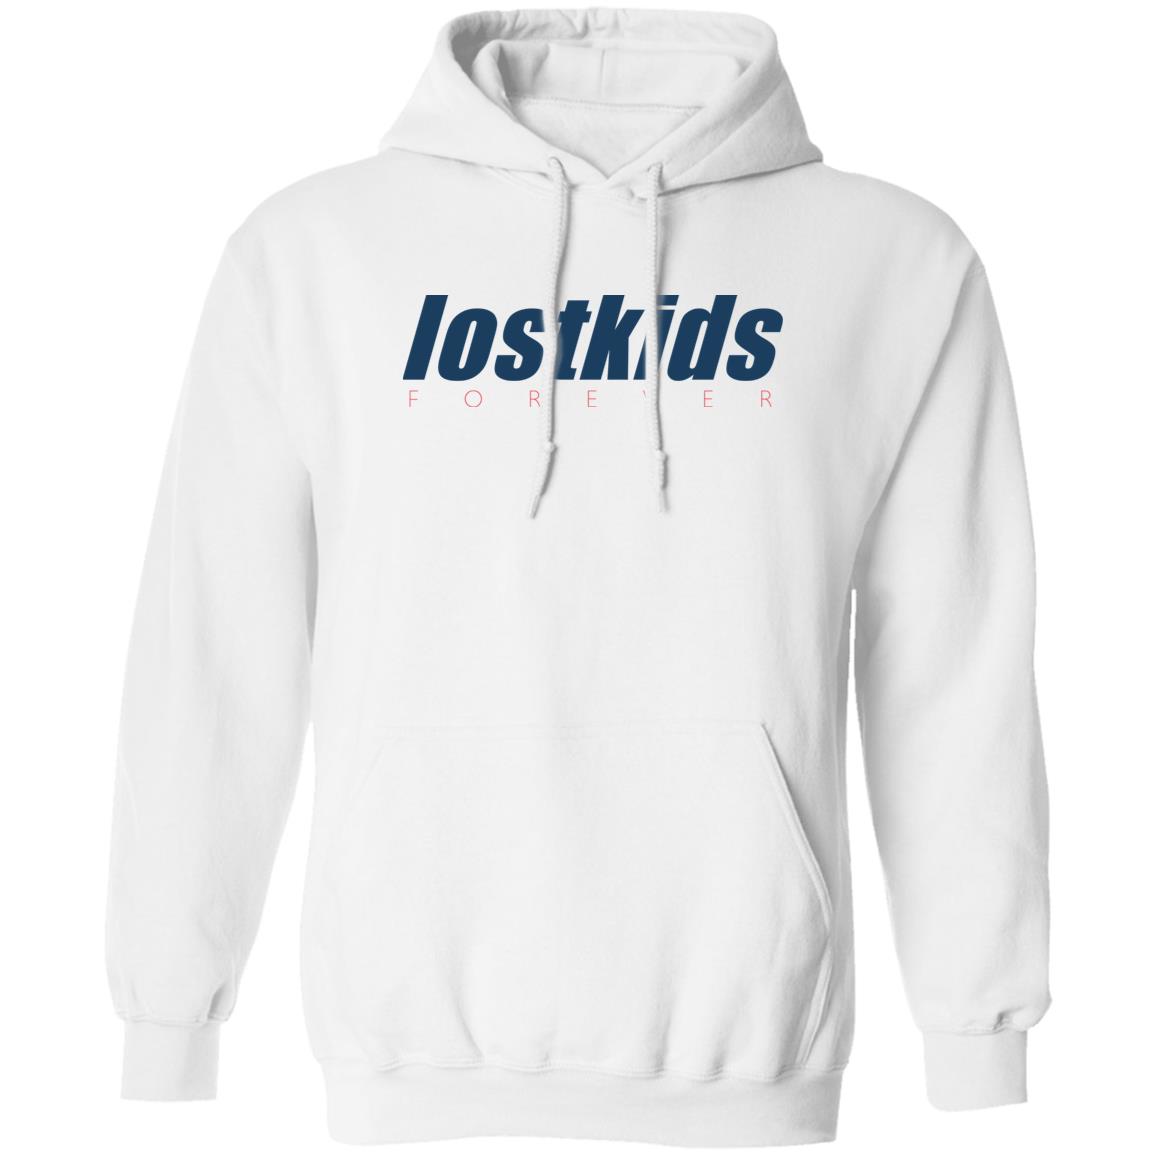 Lost Kids Forever Shirt 1